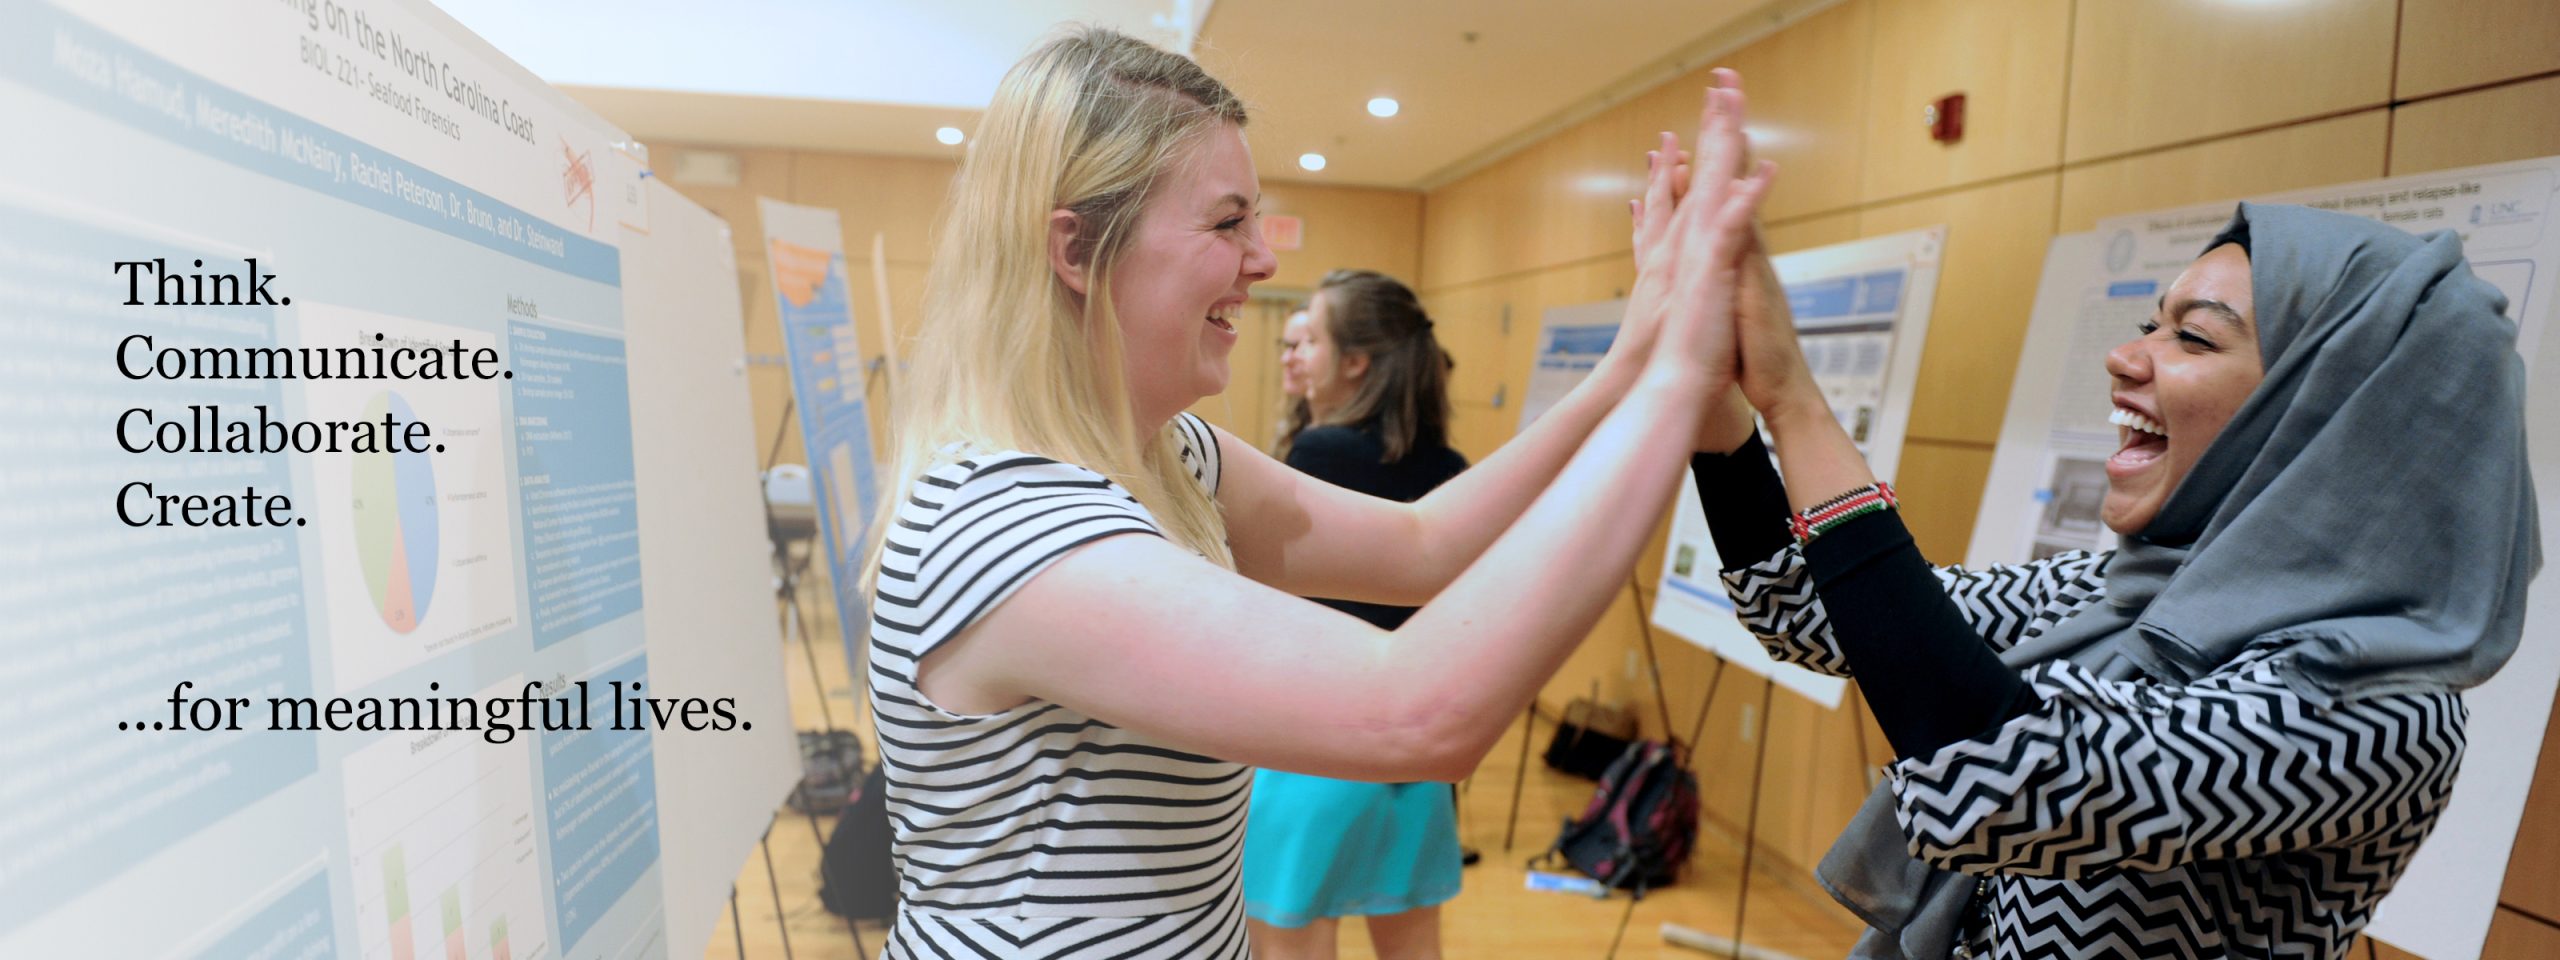 Two students smile and high-five each other at the Celebration of Undergraduate Research. A On a poster to the right, “Think. Communicate. Collaborate. Create. …for meaningful lives.”